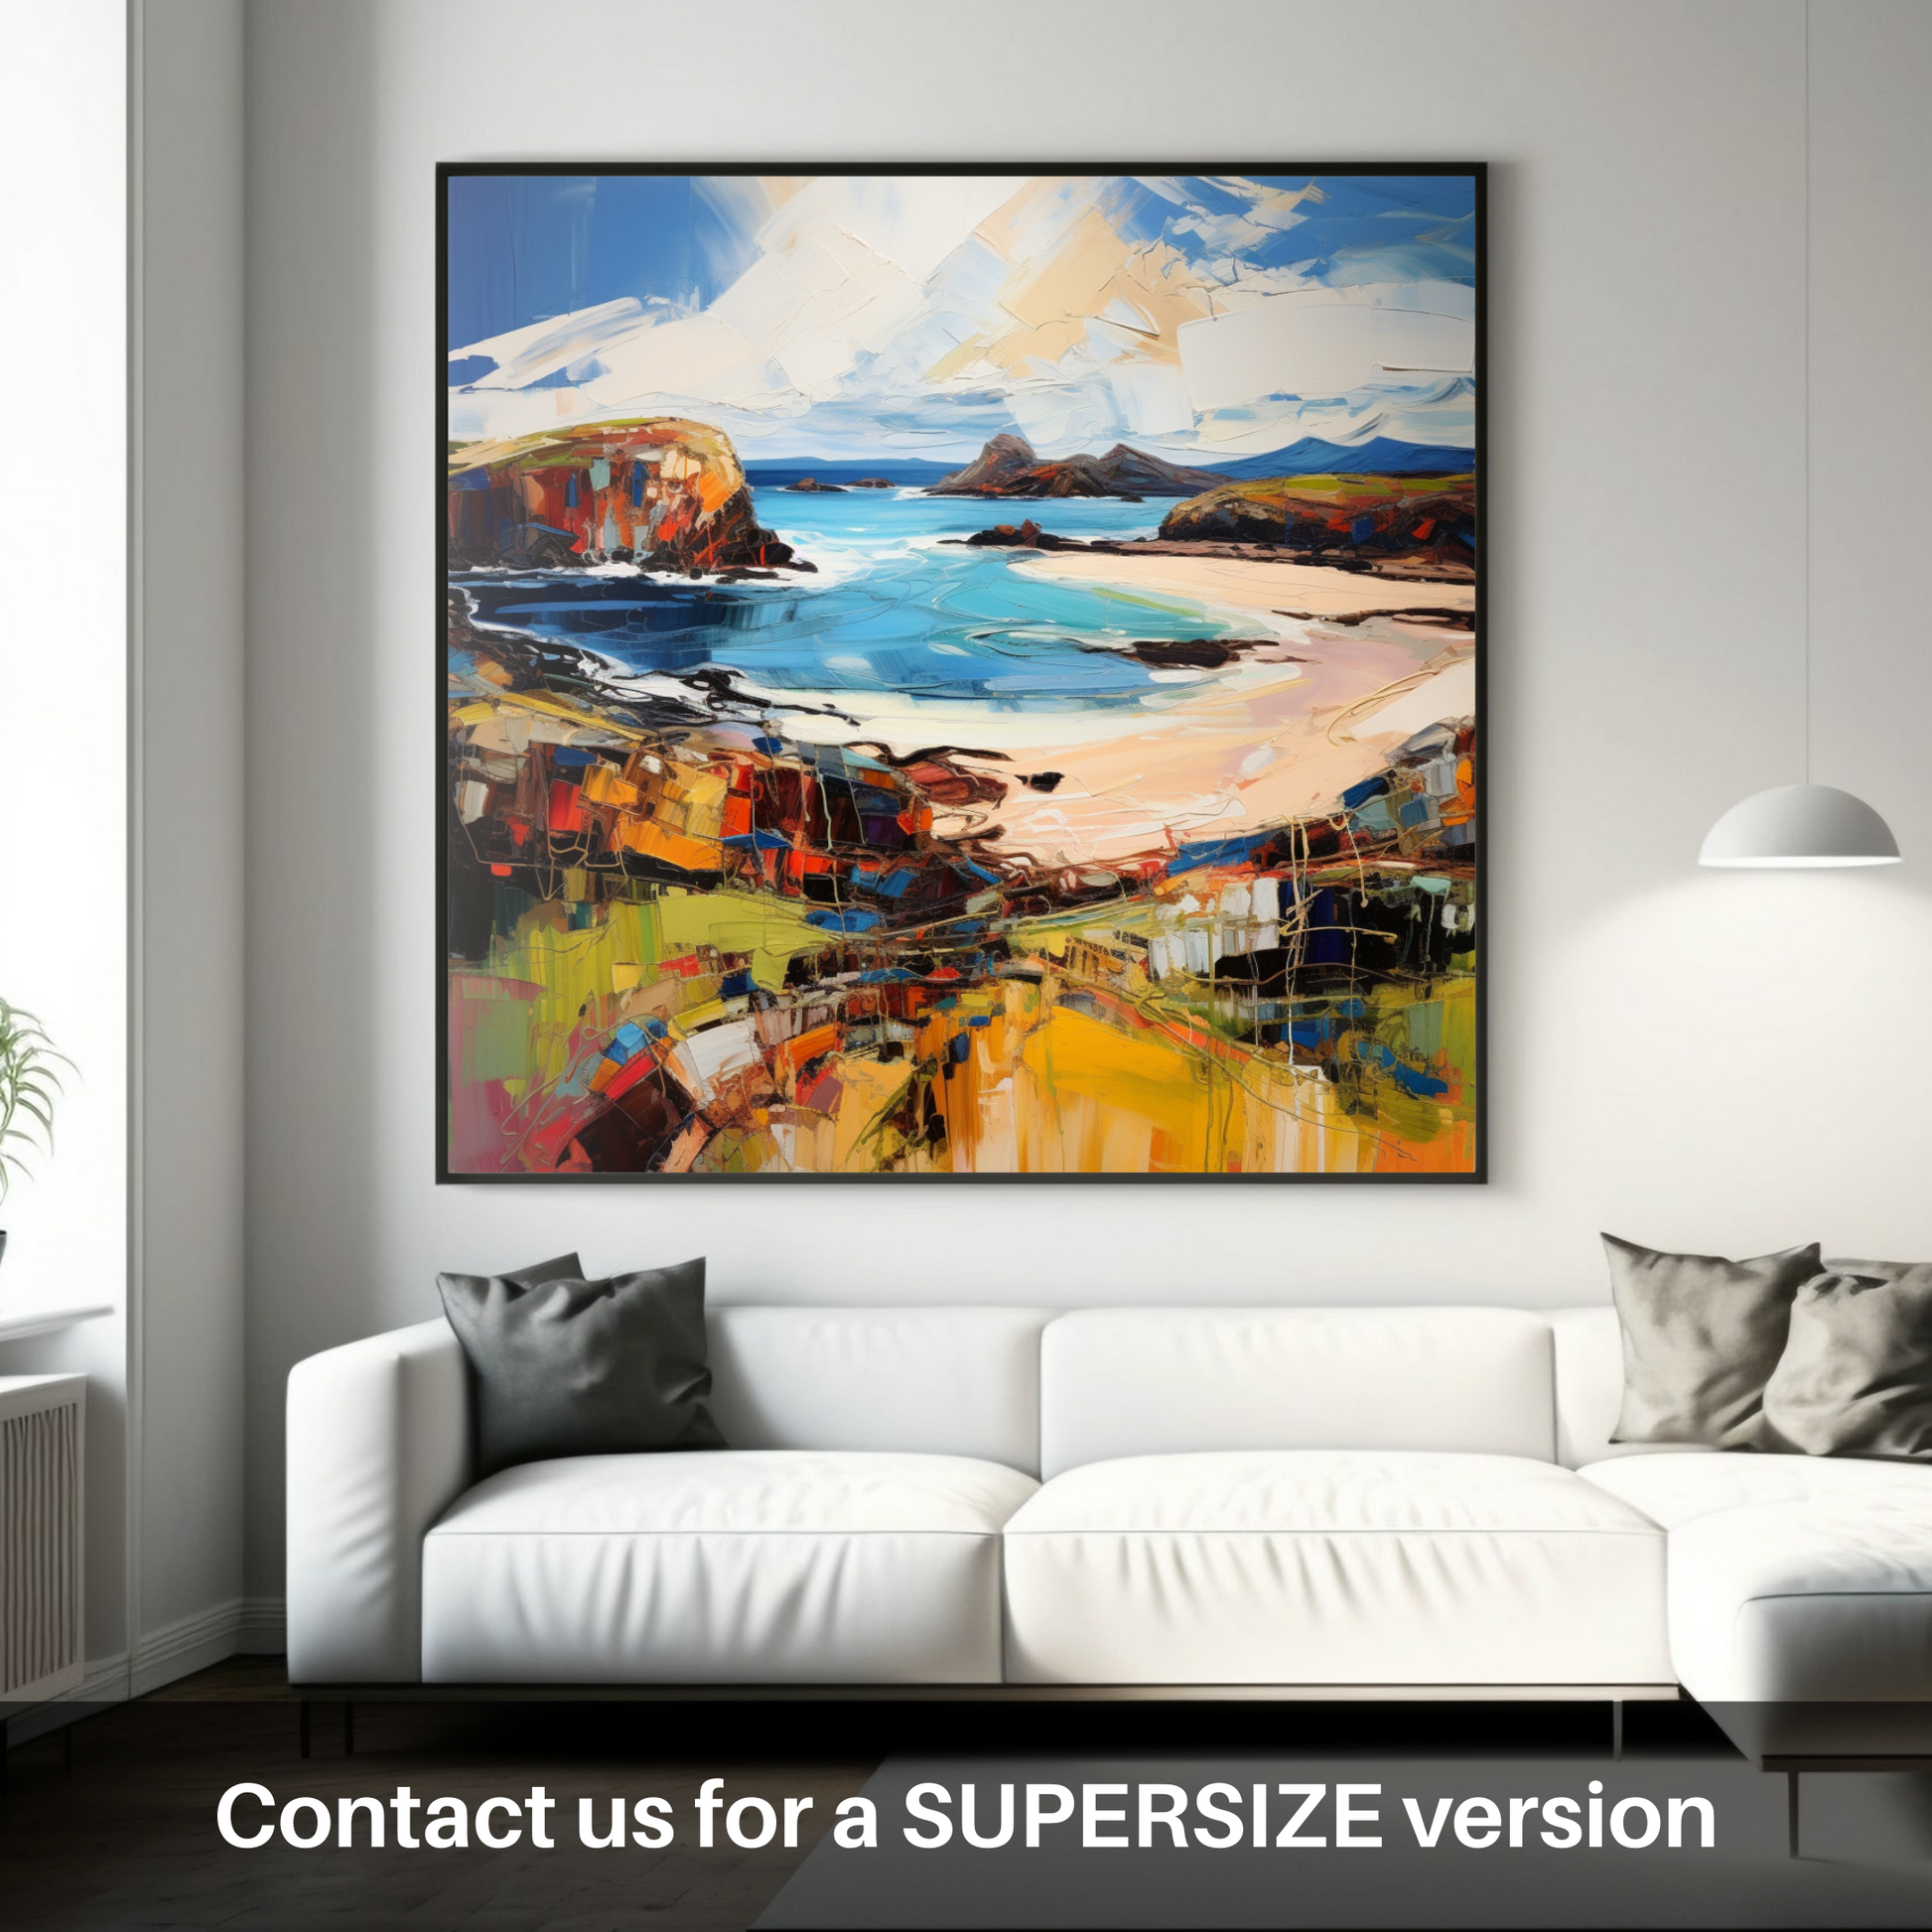 Huge supersize print of Scourie Bay, Sutherland